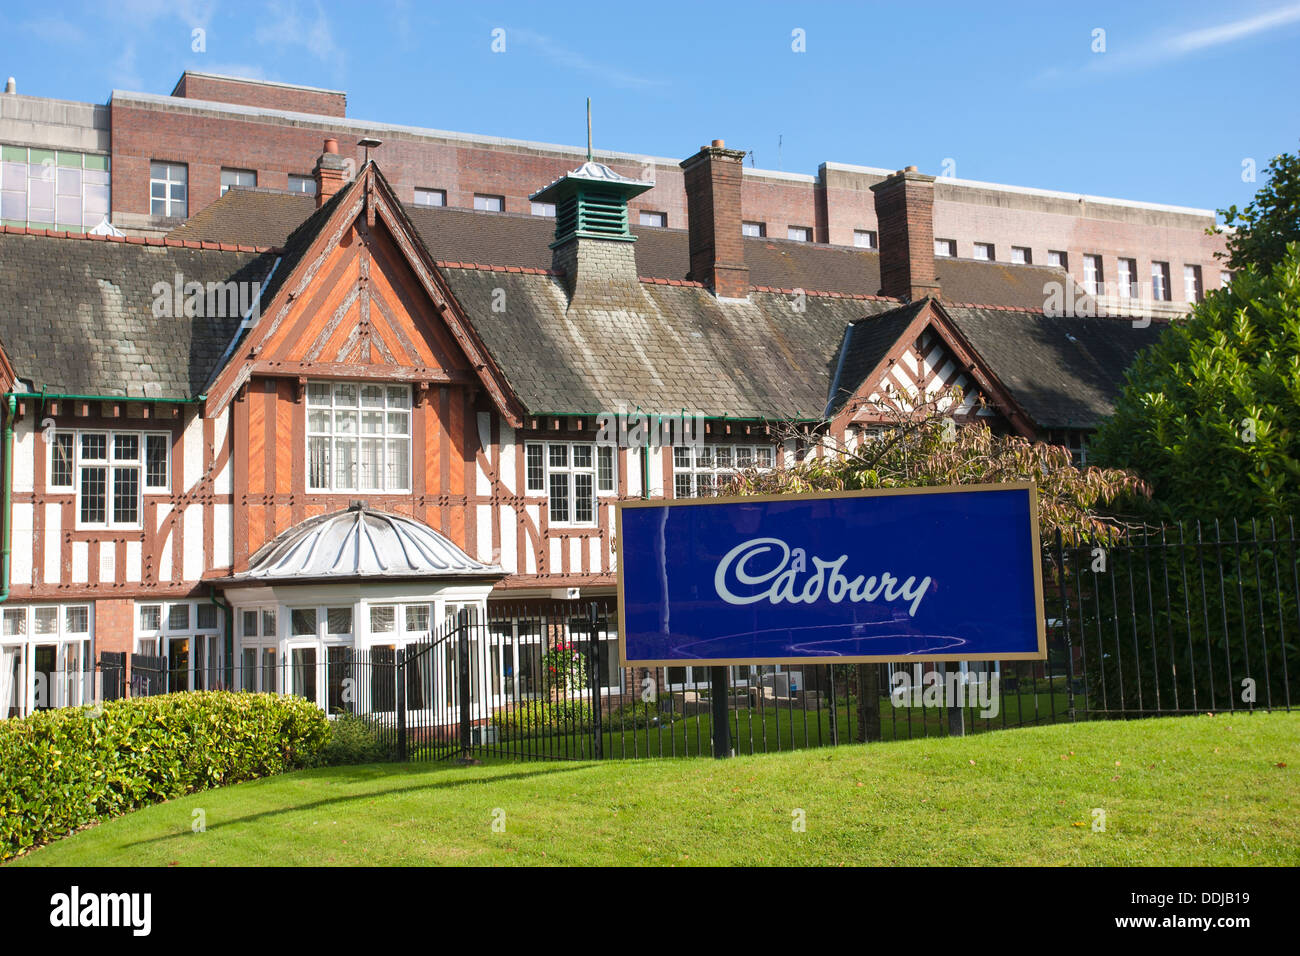 Bournville Village, the home of the Cadbury chocolate factory founded by George Cadbury in 1879, England, United Kingdom Stock Photo